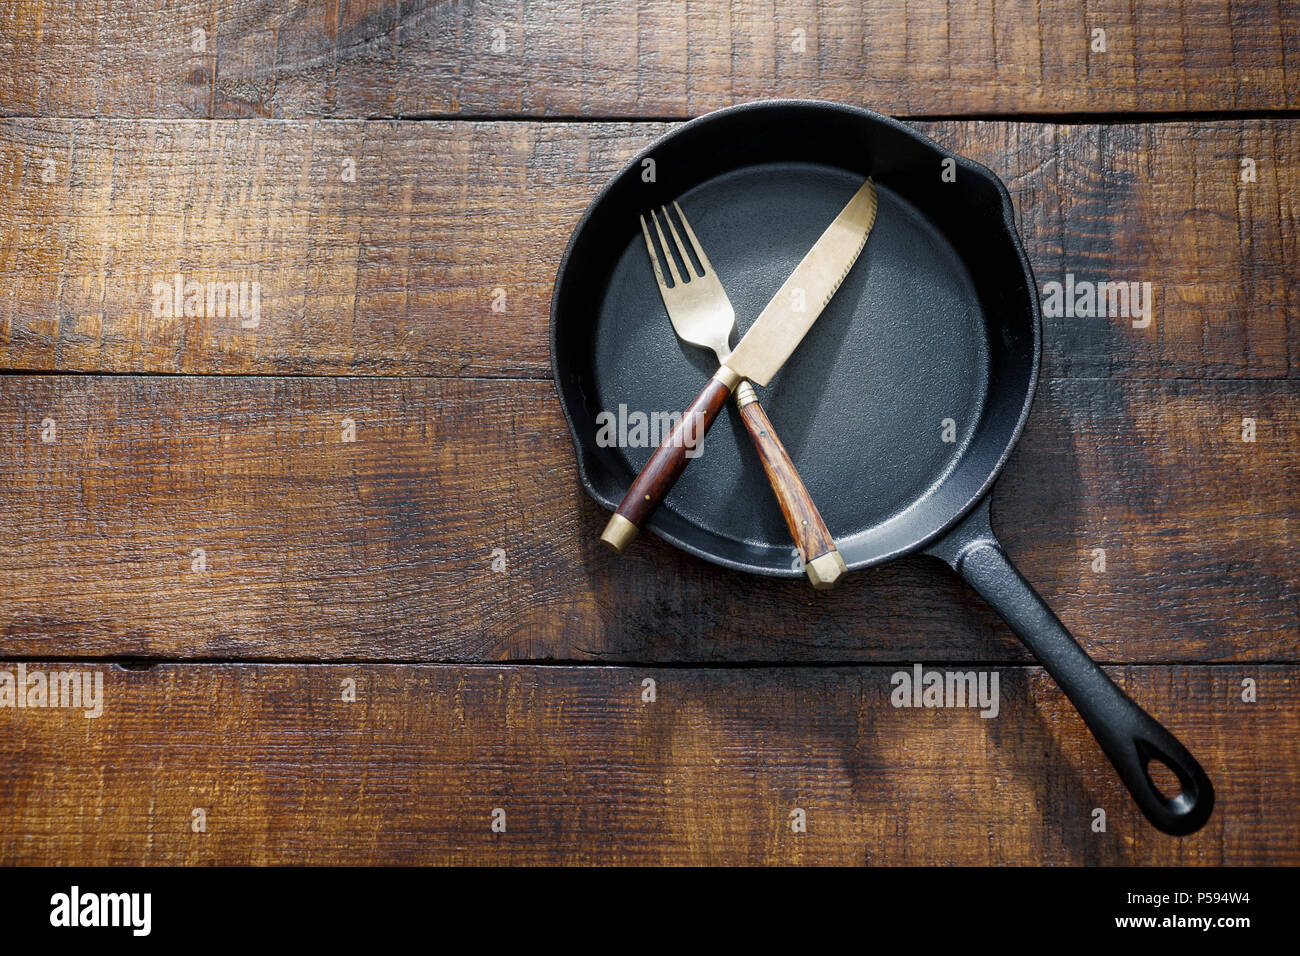 Small cast-iron frying pan with fork and knife on vintage wooden table, top view Stock Photo